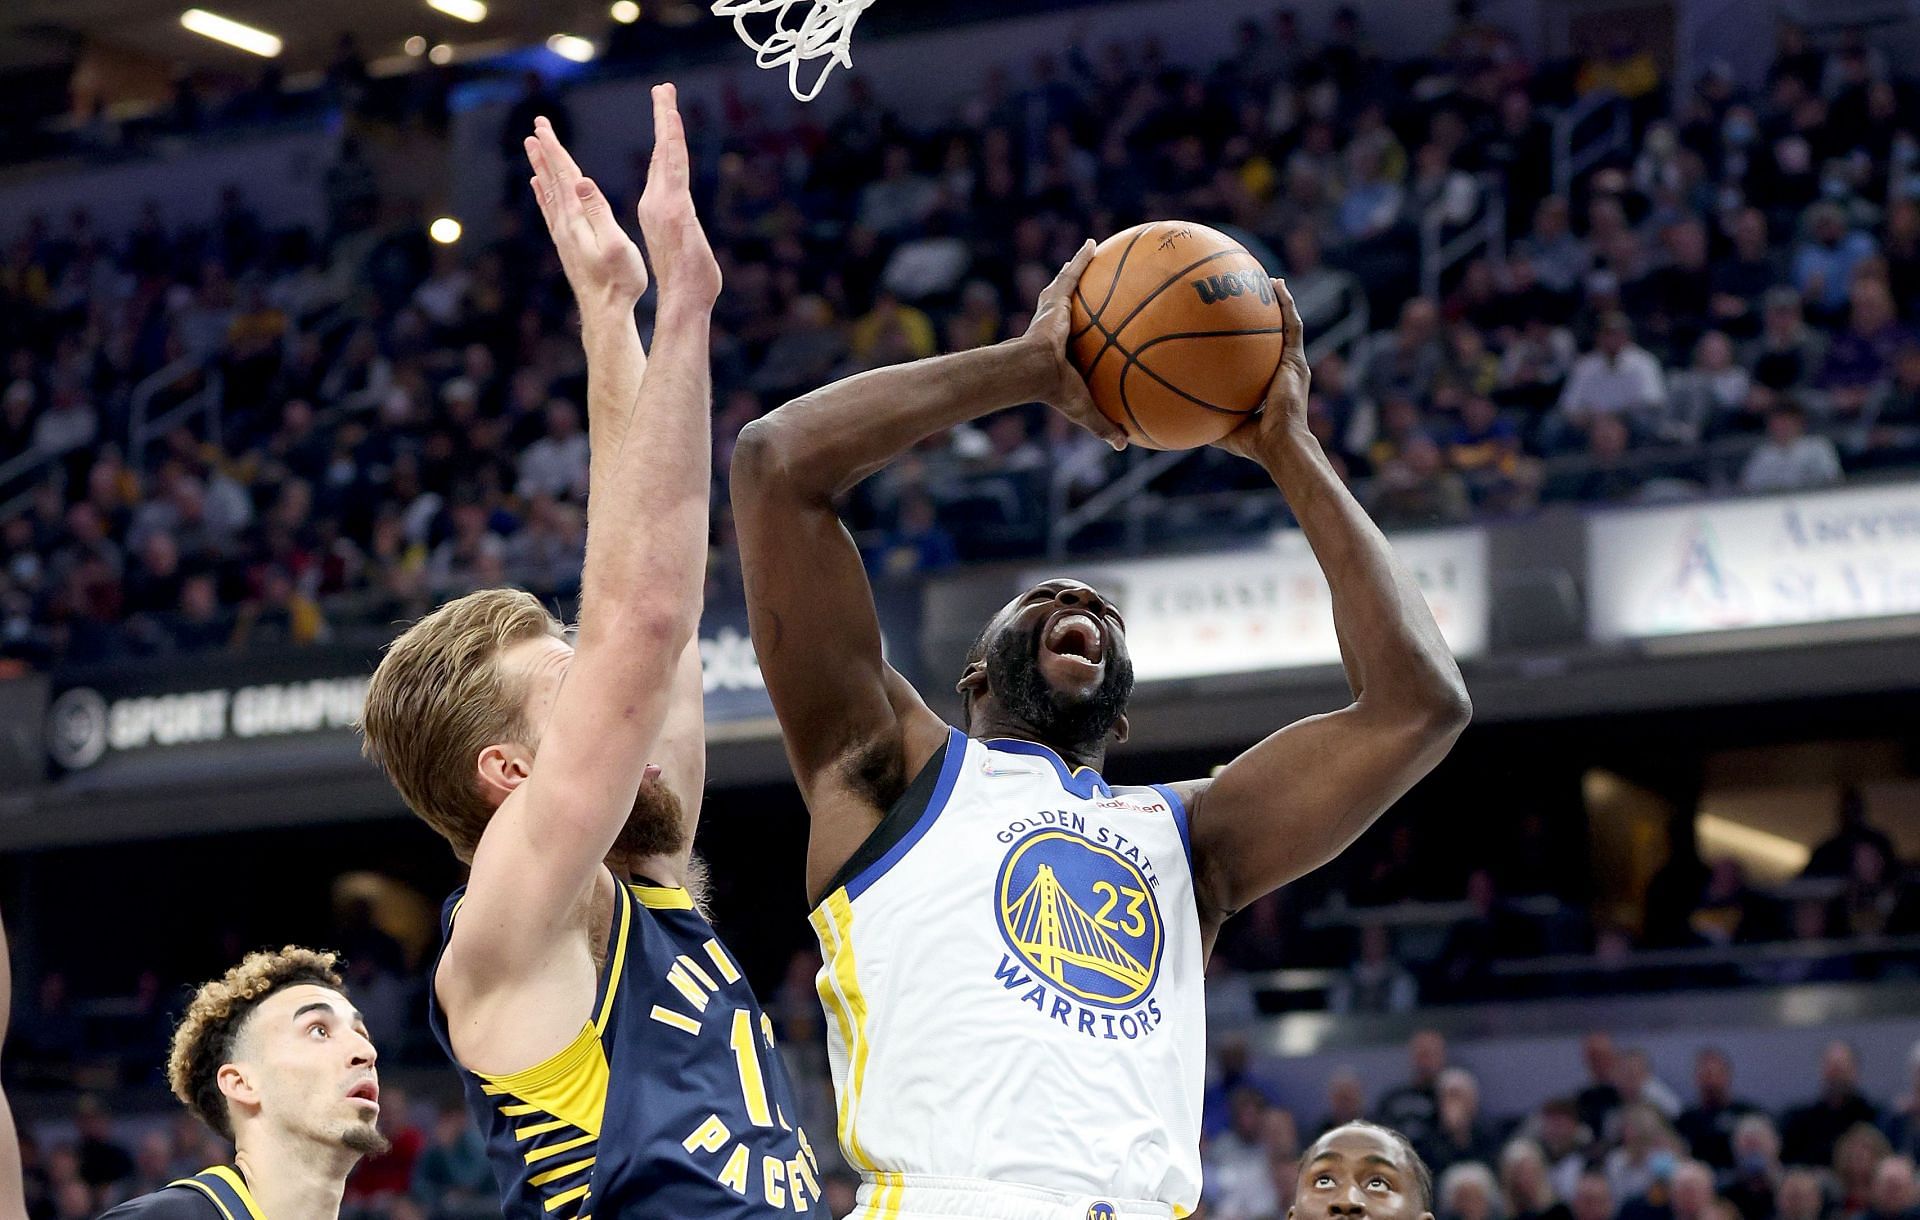 Draymond Green of the Golden State Warriors against the Indiana Pacers